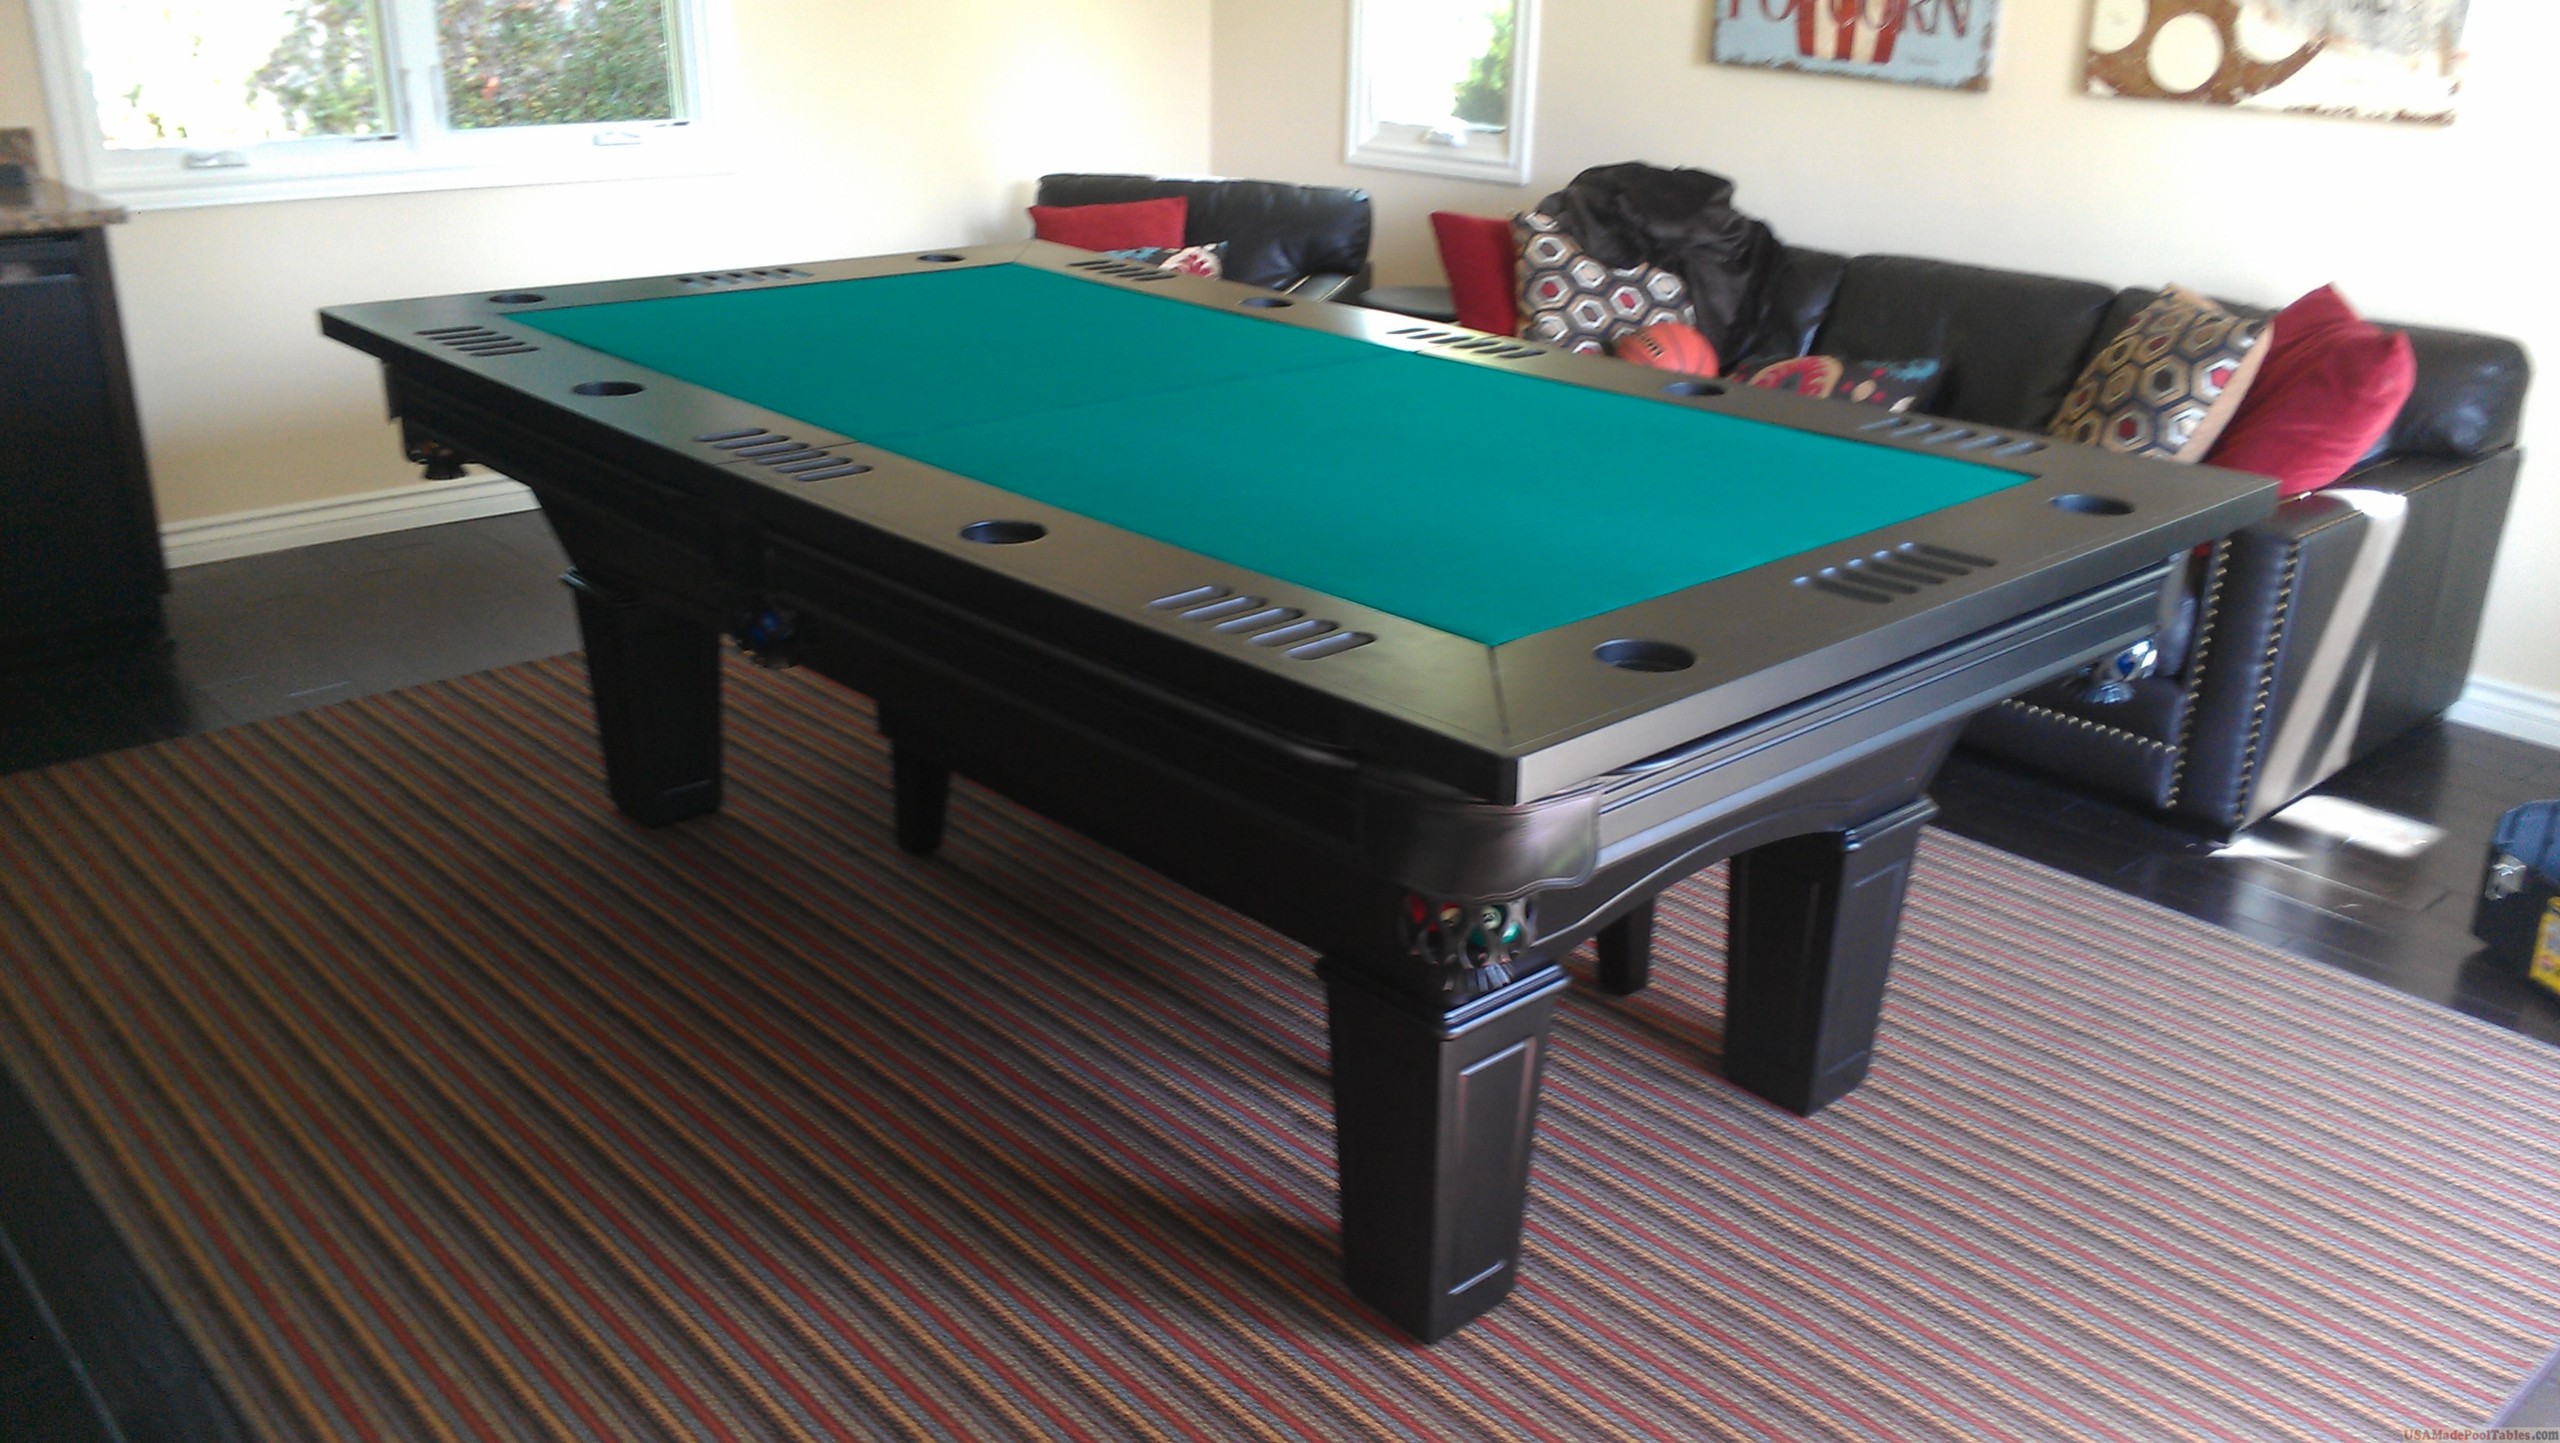 Poker dining top pool table top pool table dining top